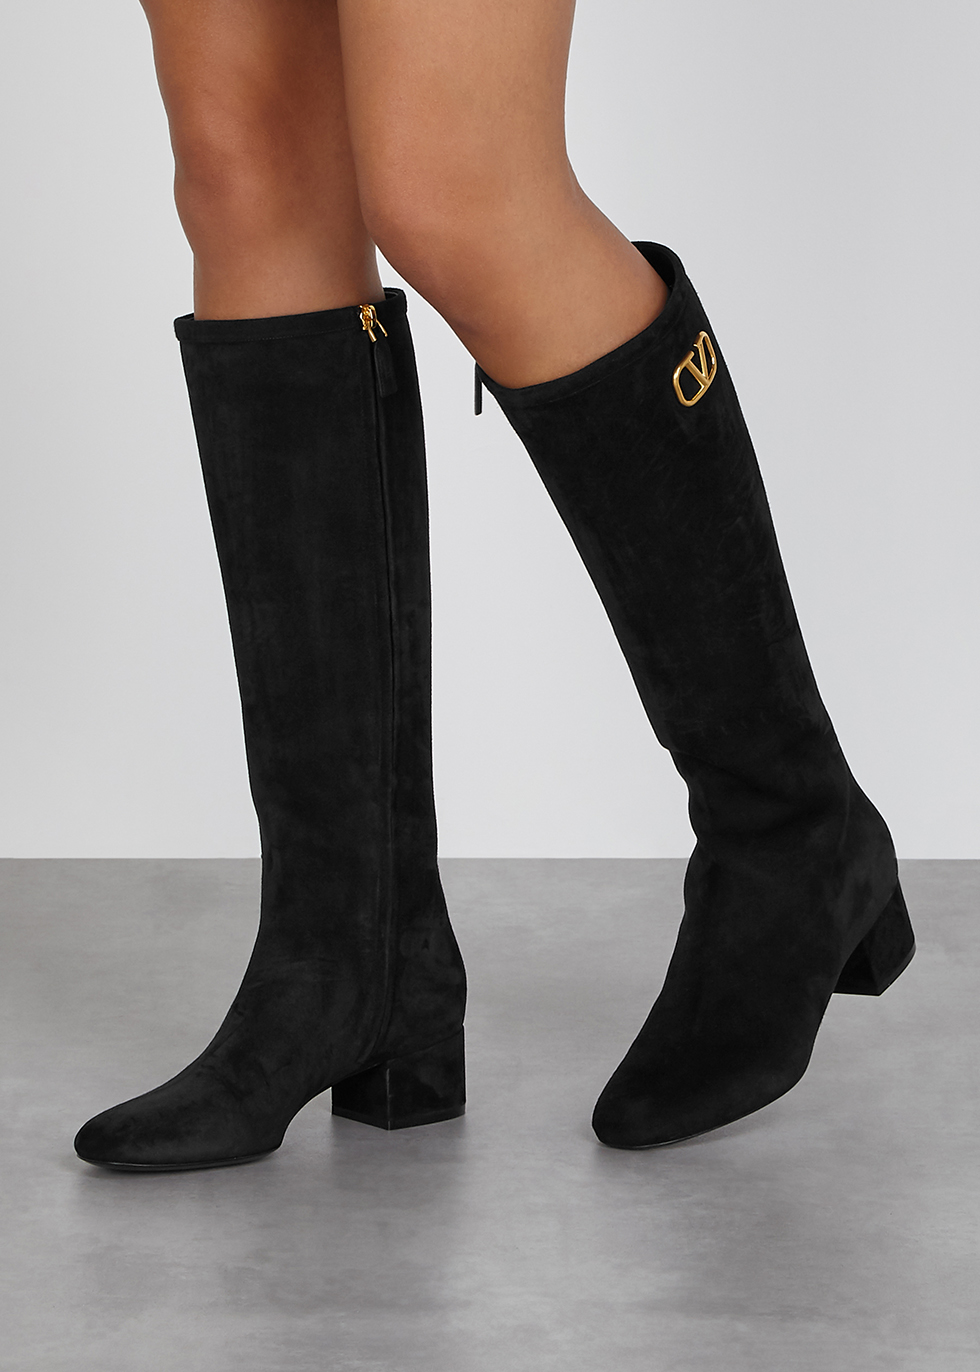 black knee length suede boots